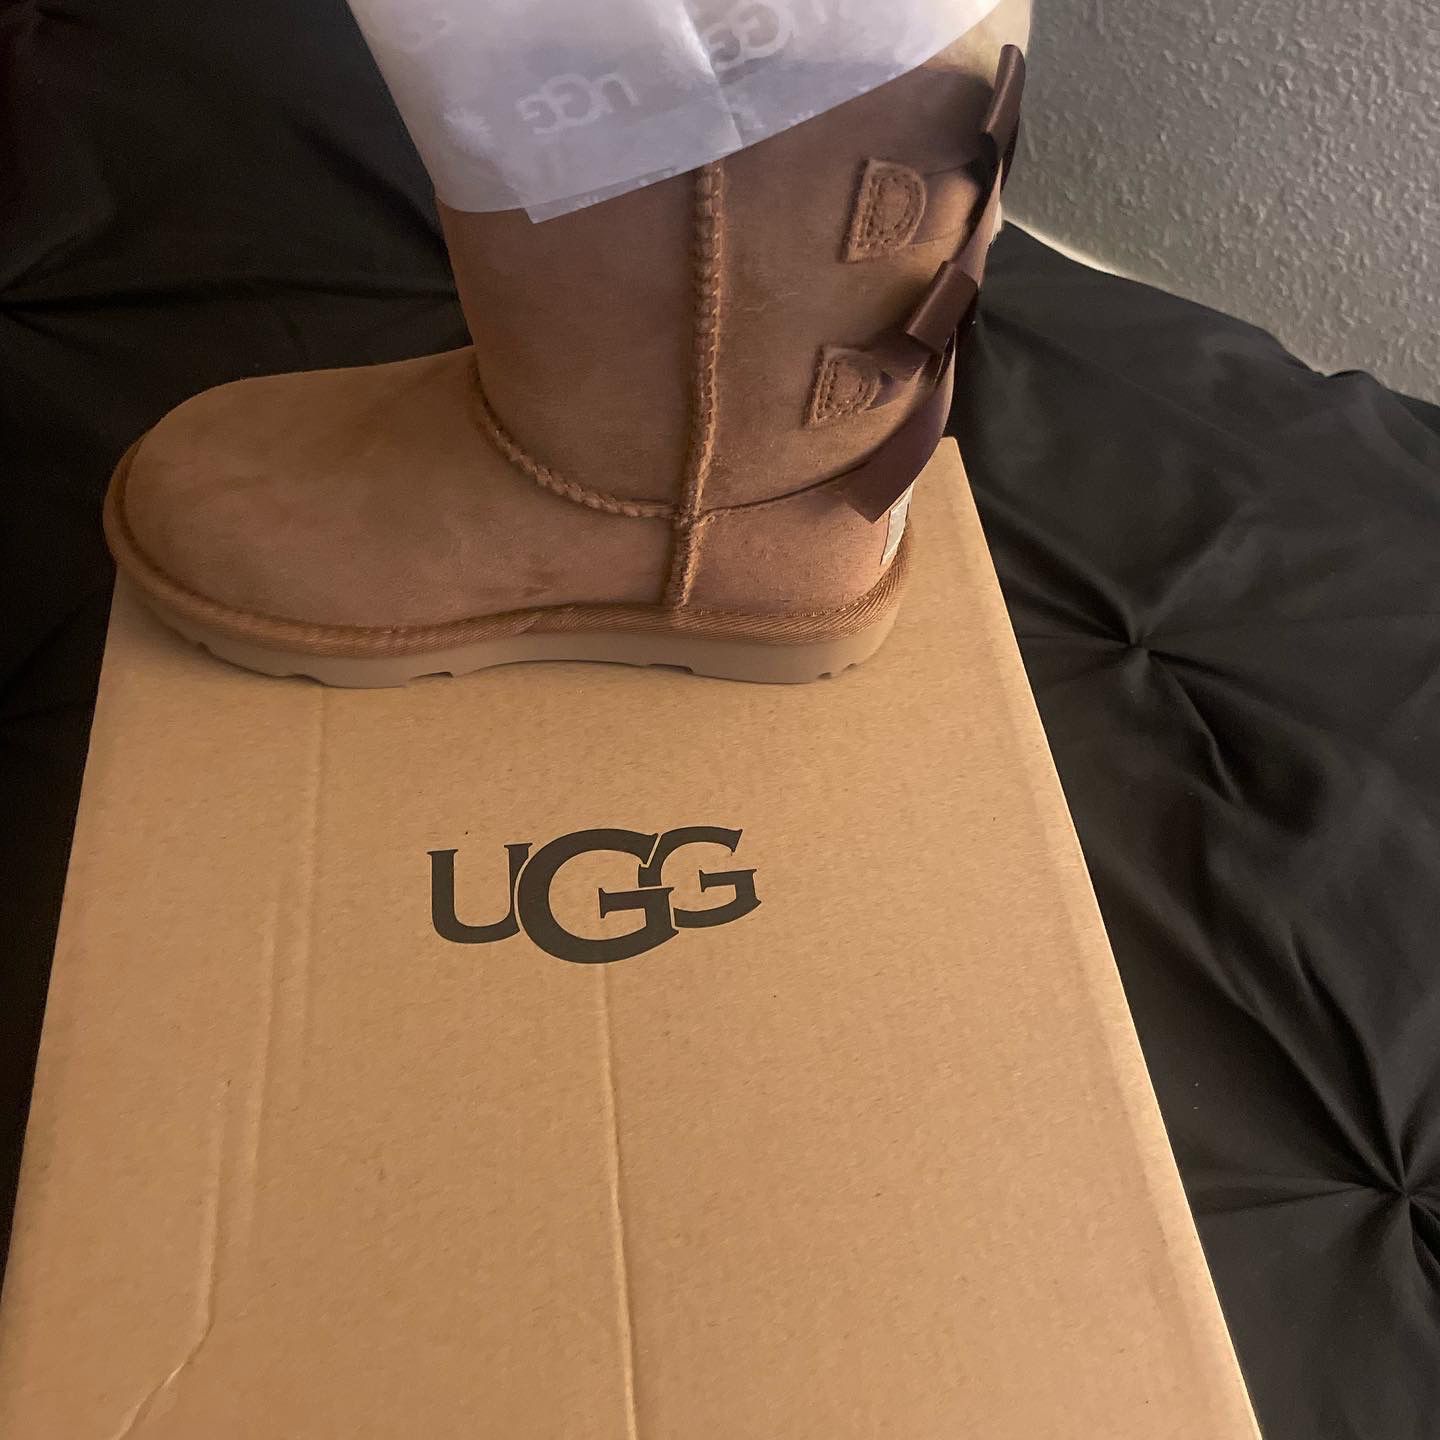 Kids Uggs Size 12 $120 Two Pairs 